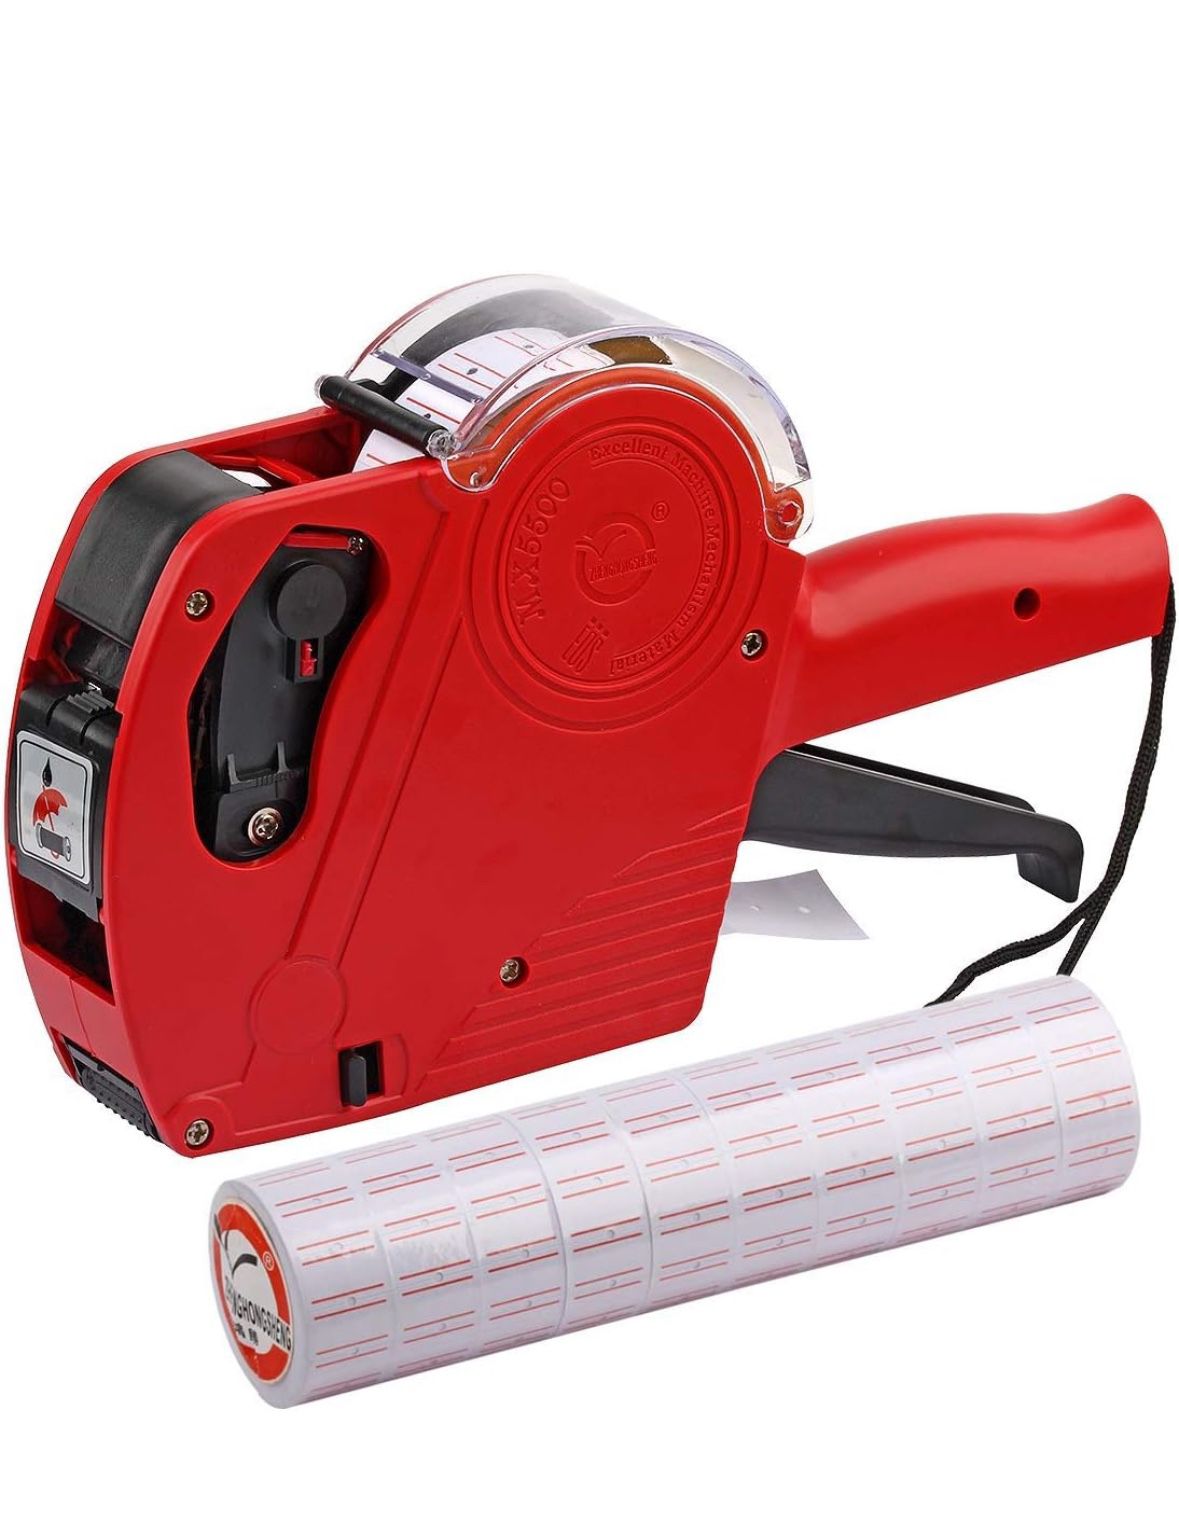 MX5500 EOS Red 8 Digits Pricing Gun Kit with 7,000 Labels & Spare Ink